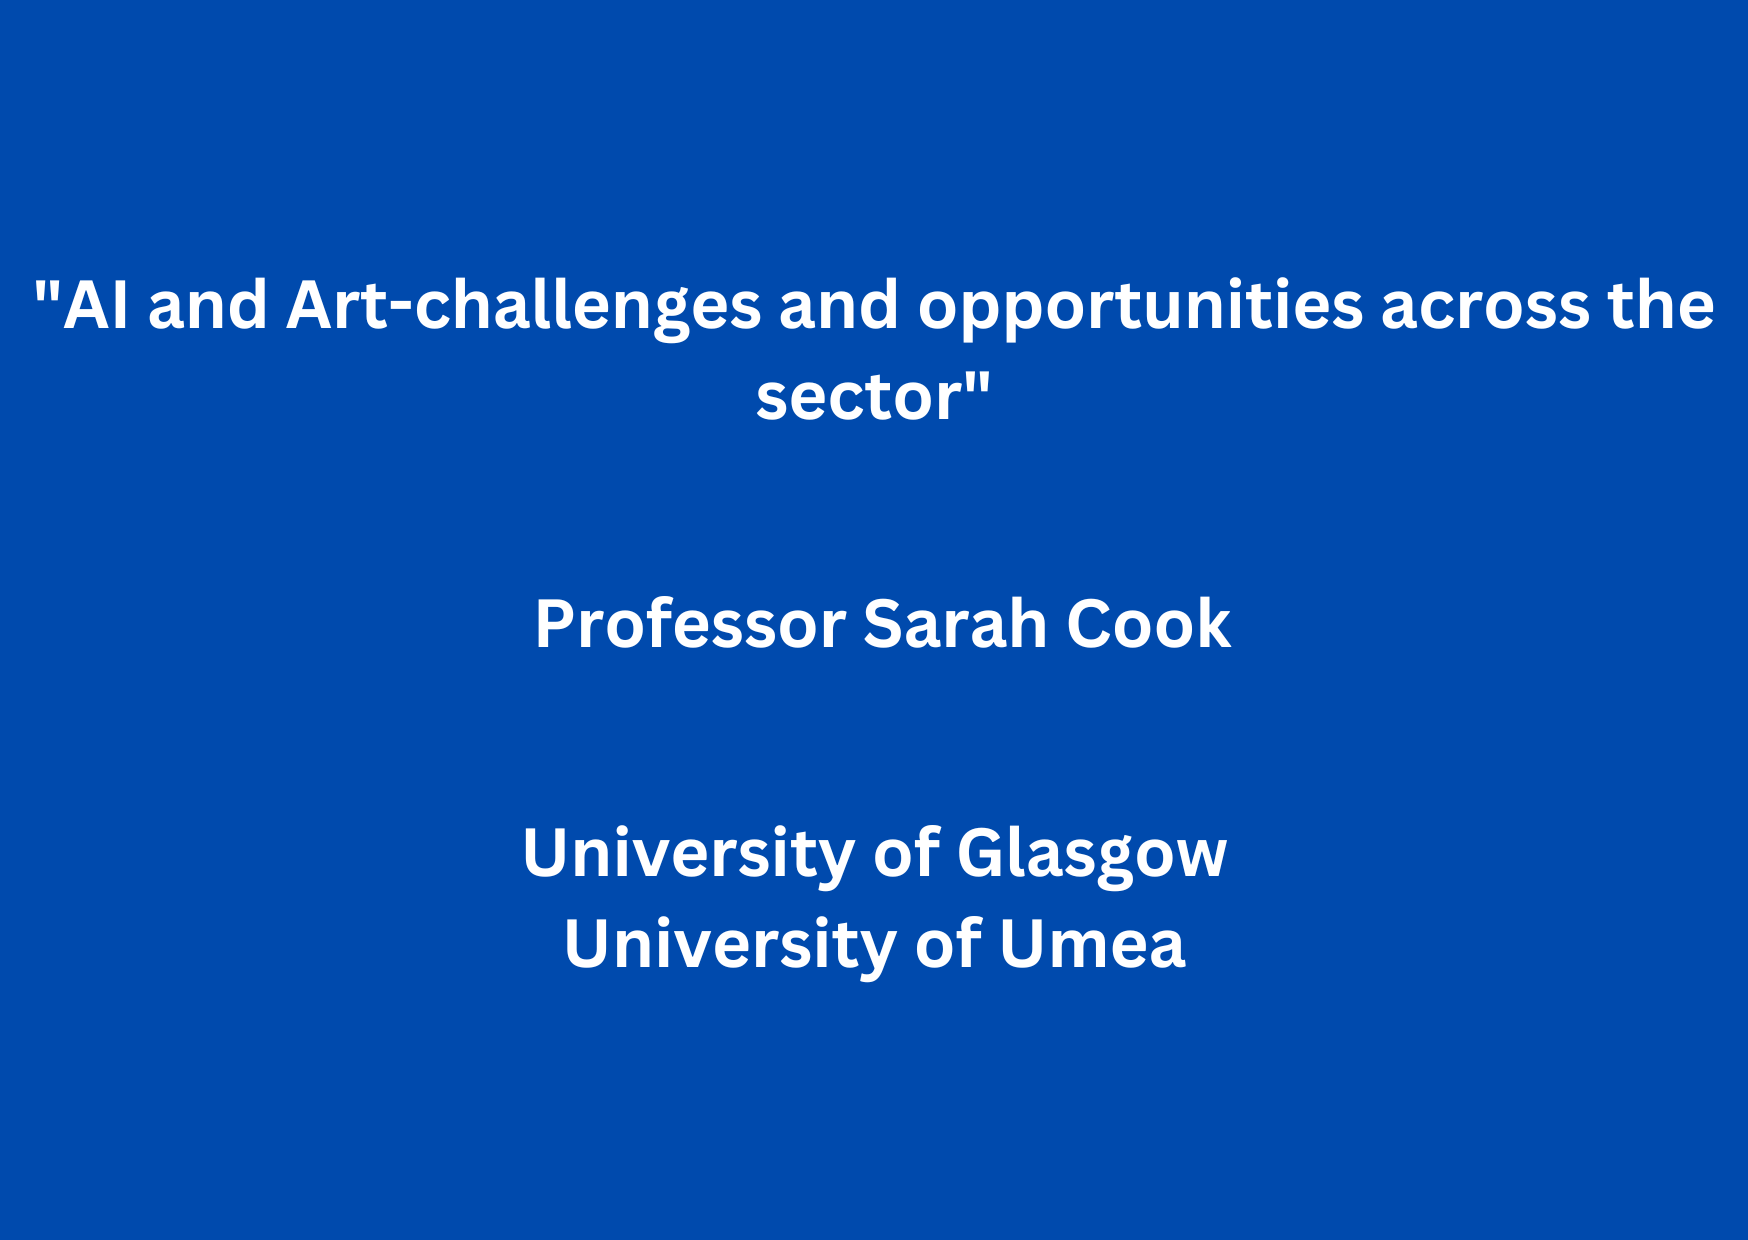 AEOLIAN Workhop 6: “AI and Art-challenges and opportunities across the sector” by Professor Sarah Cook